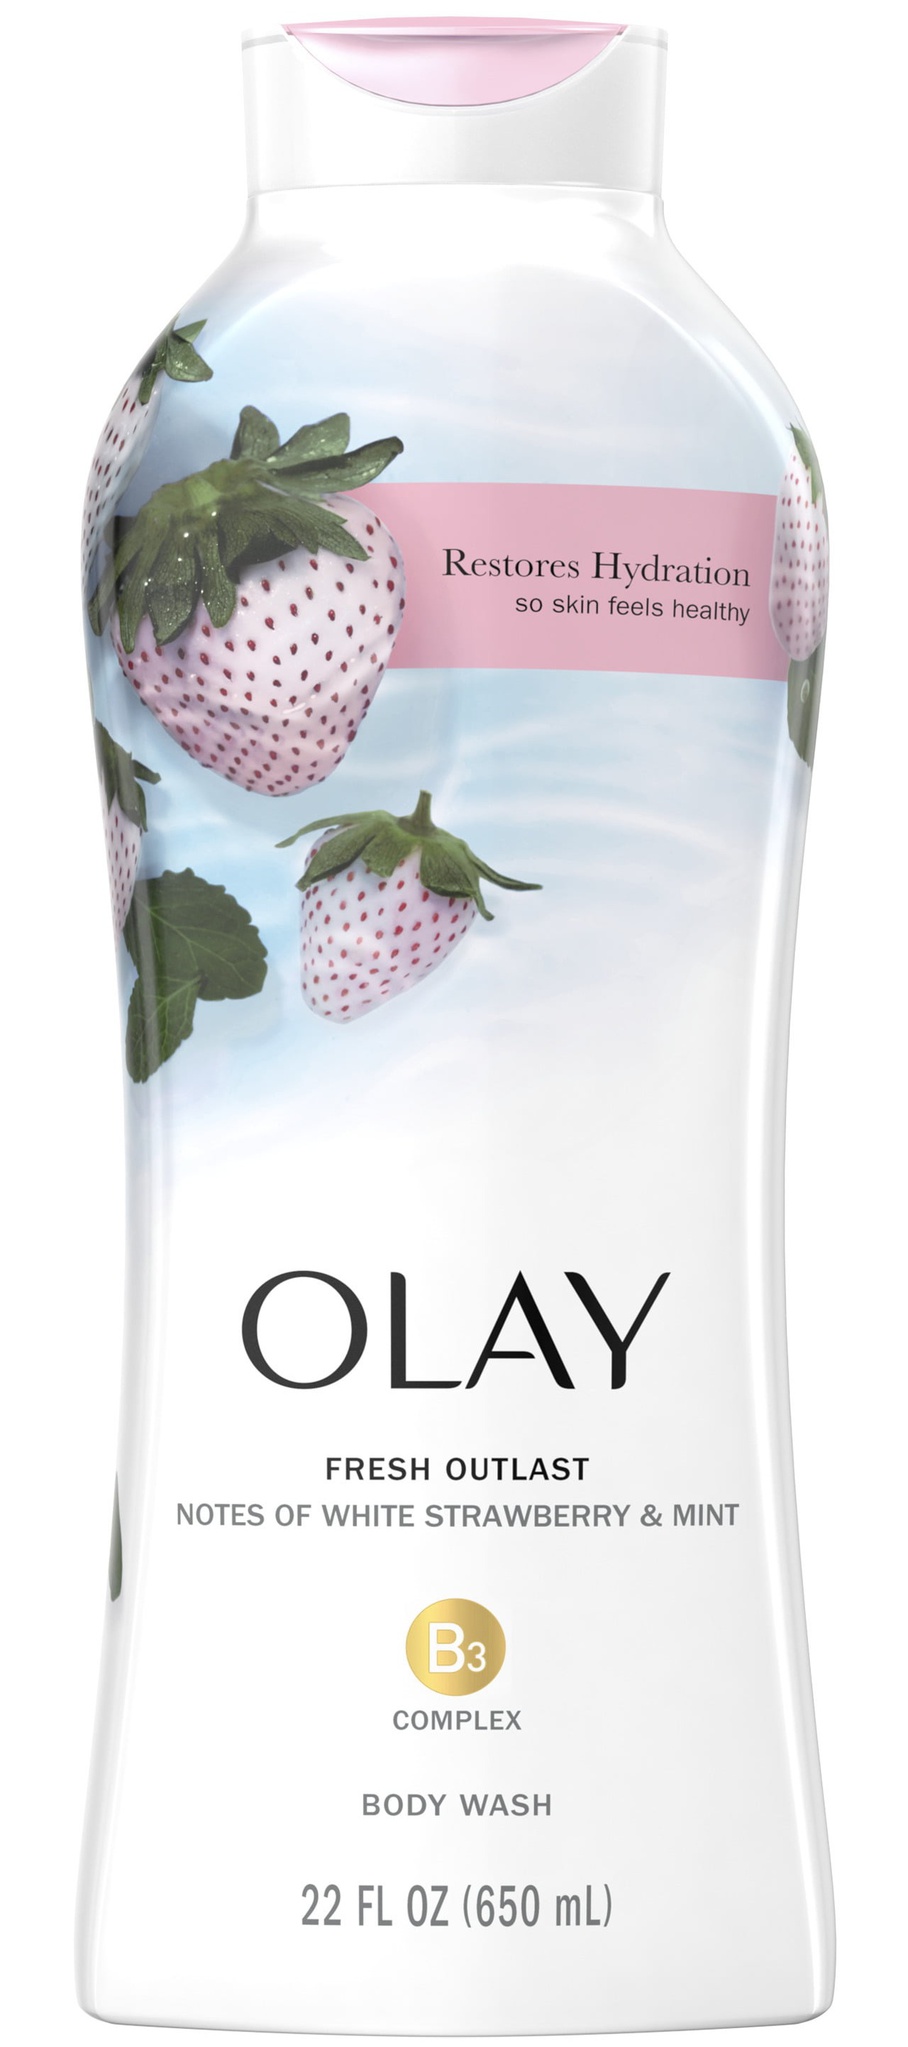 Olay Fresh Outlast White Strawberry And Mint